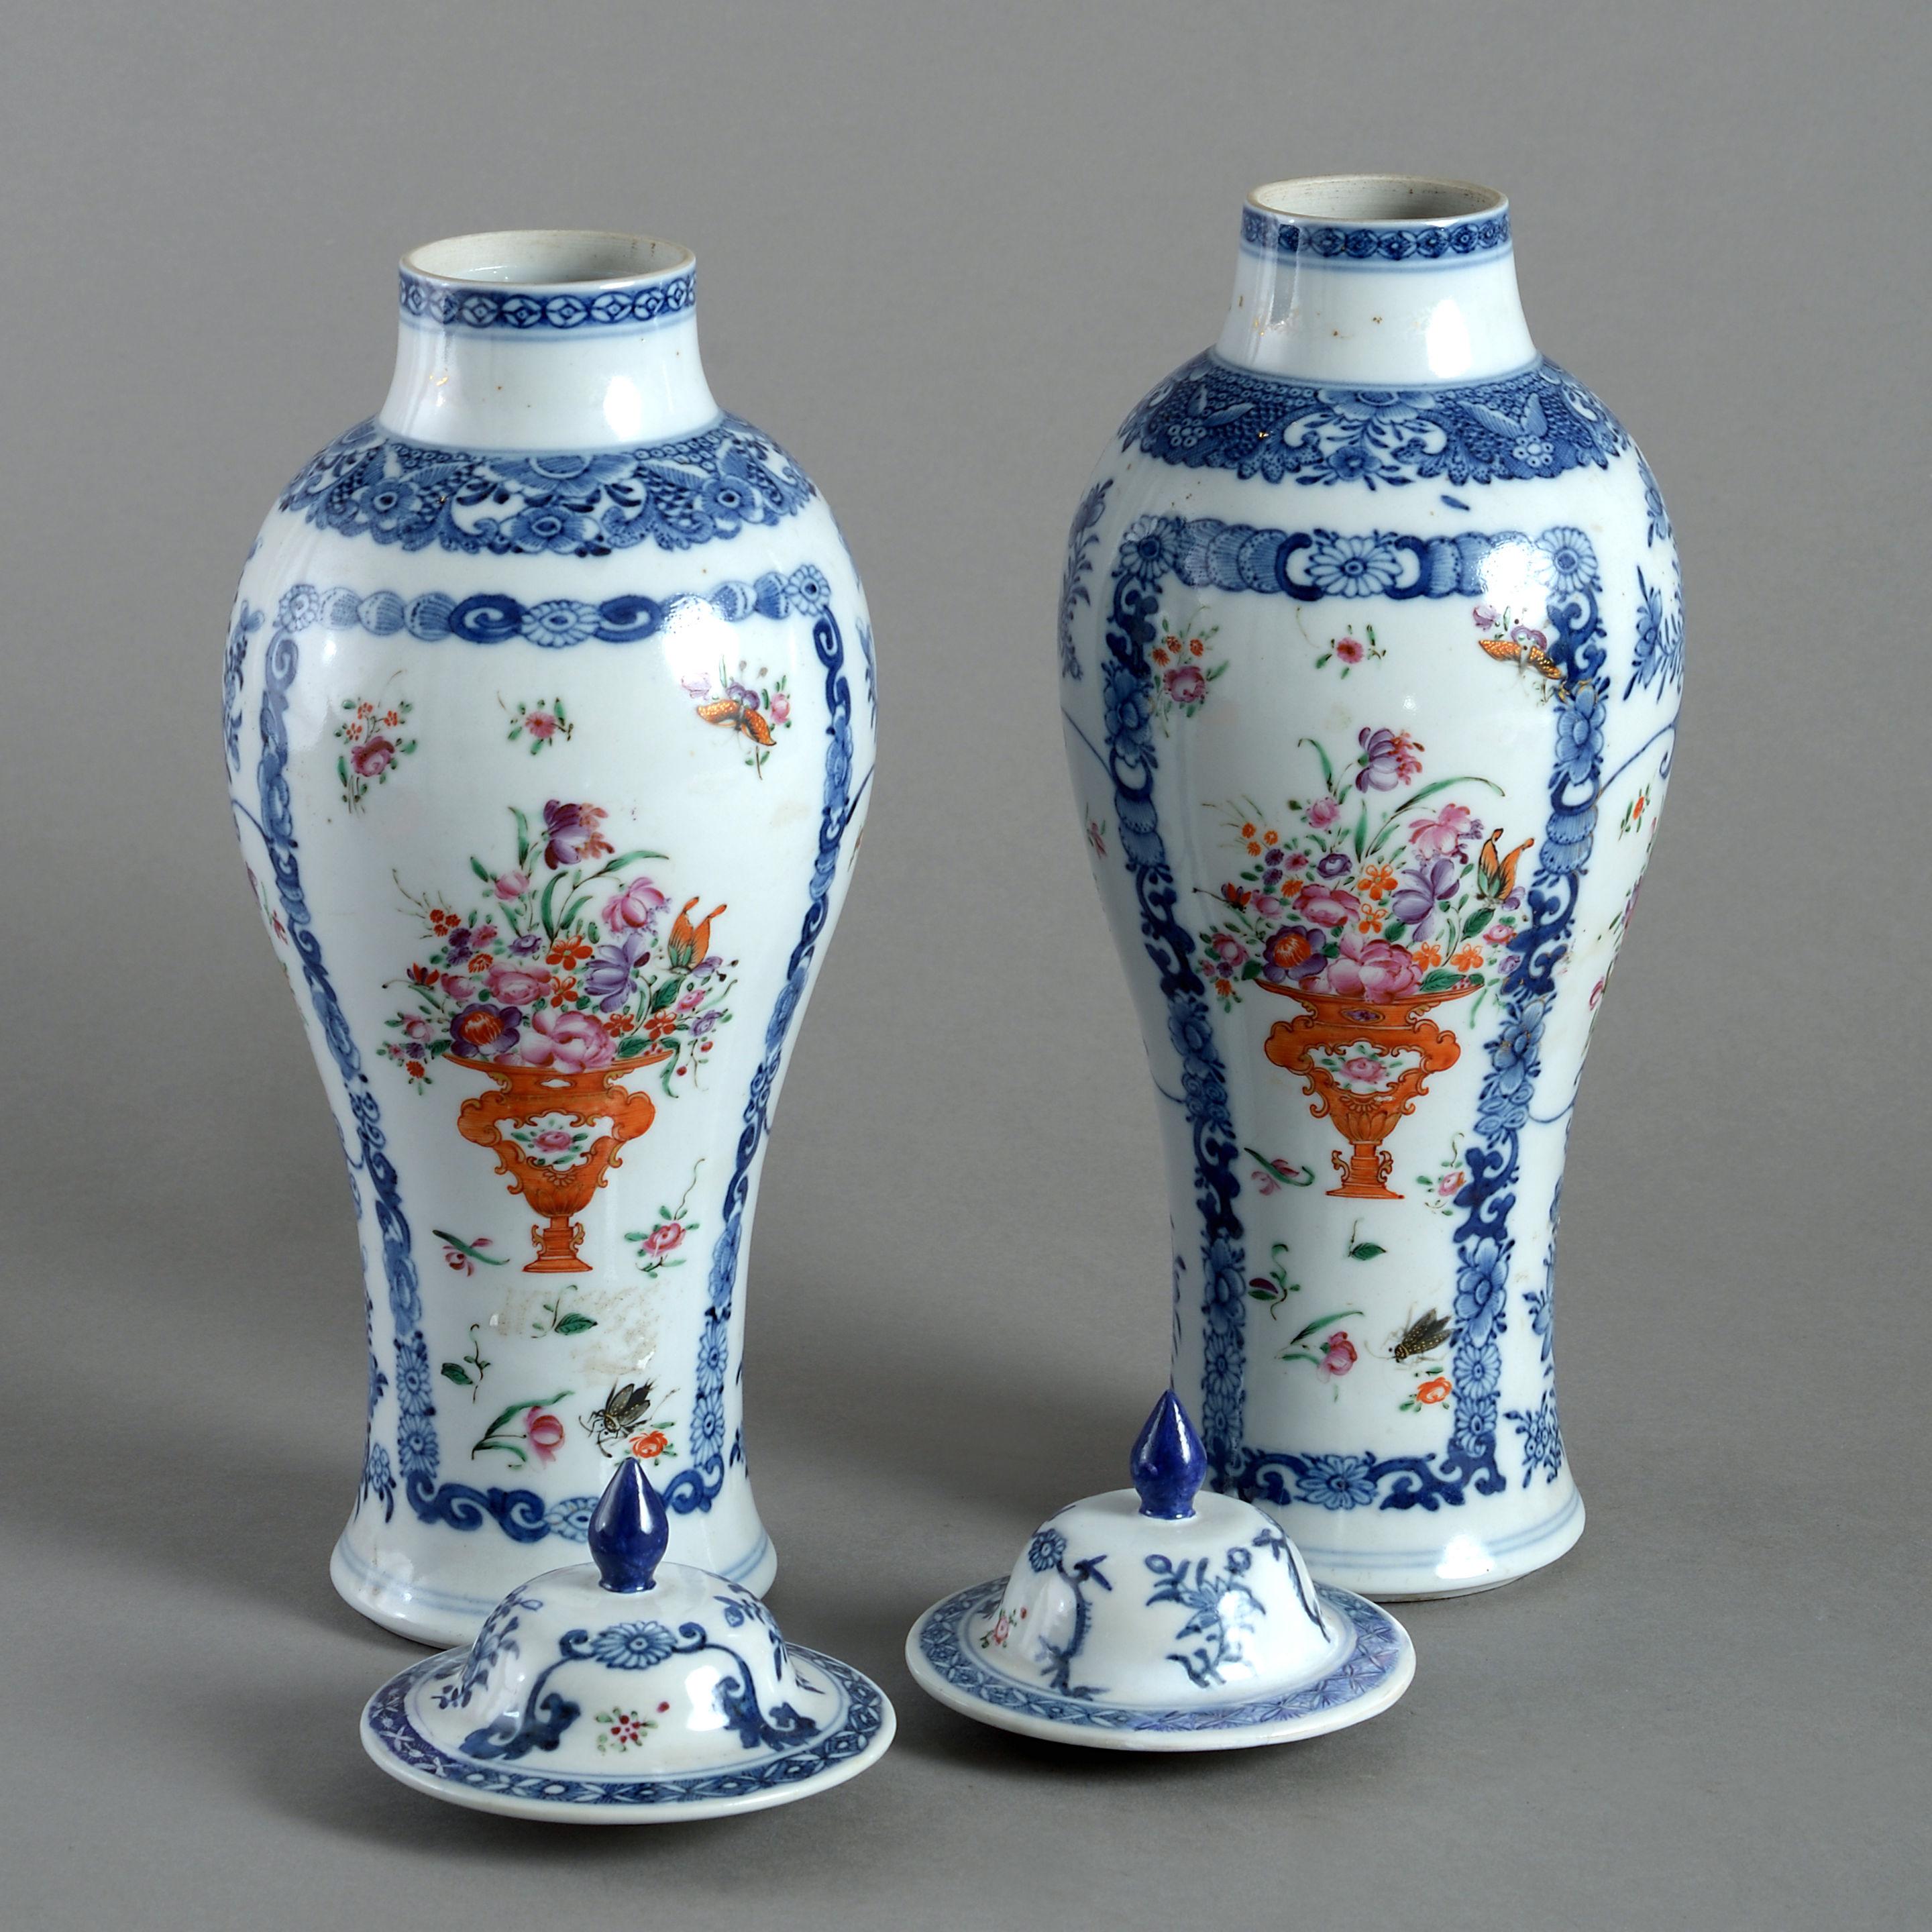 Chinese Pair of 18th Century Qianlong Period Porcelain Vases